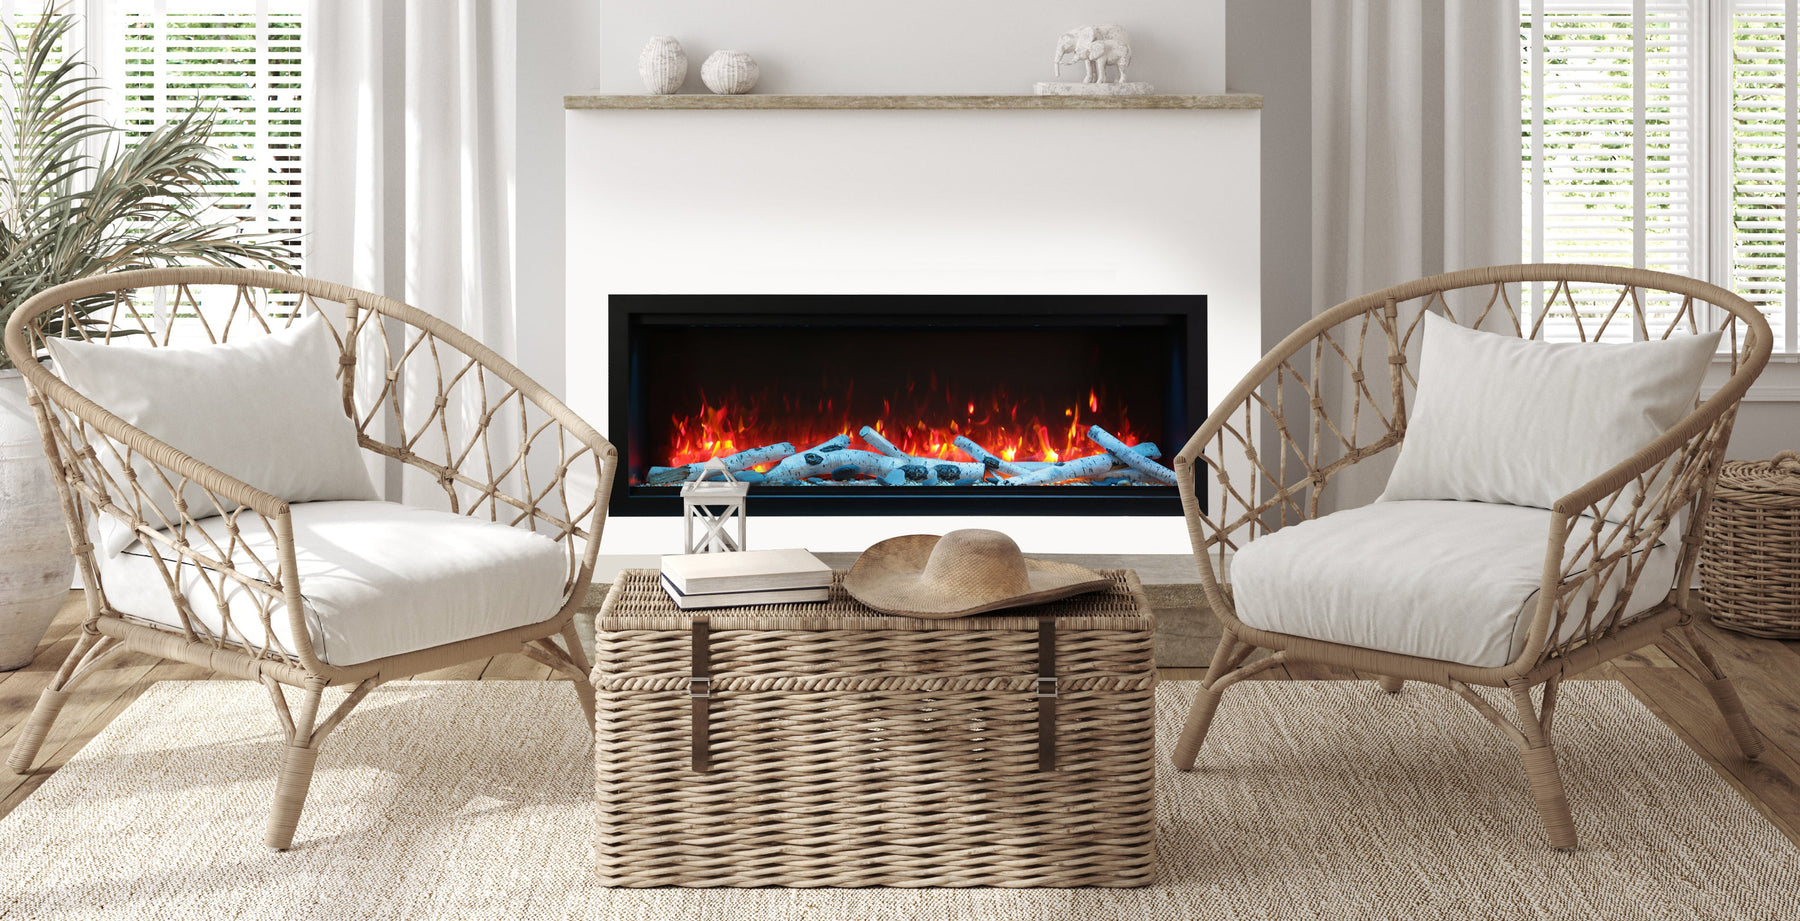 Amantii 60" Symmetry 3.0 Built-in Smart WiFi Electric Fireplace -SYM-60- Lifestyle Living Room With Concrete Fireplace